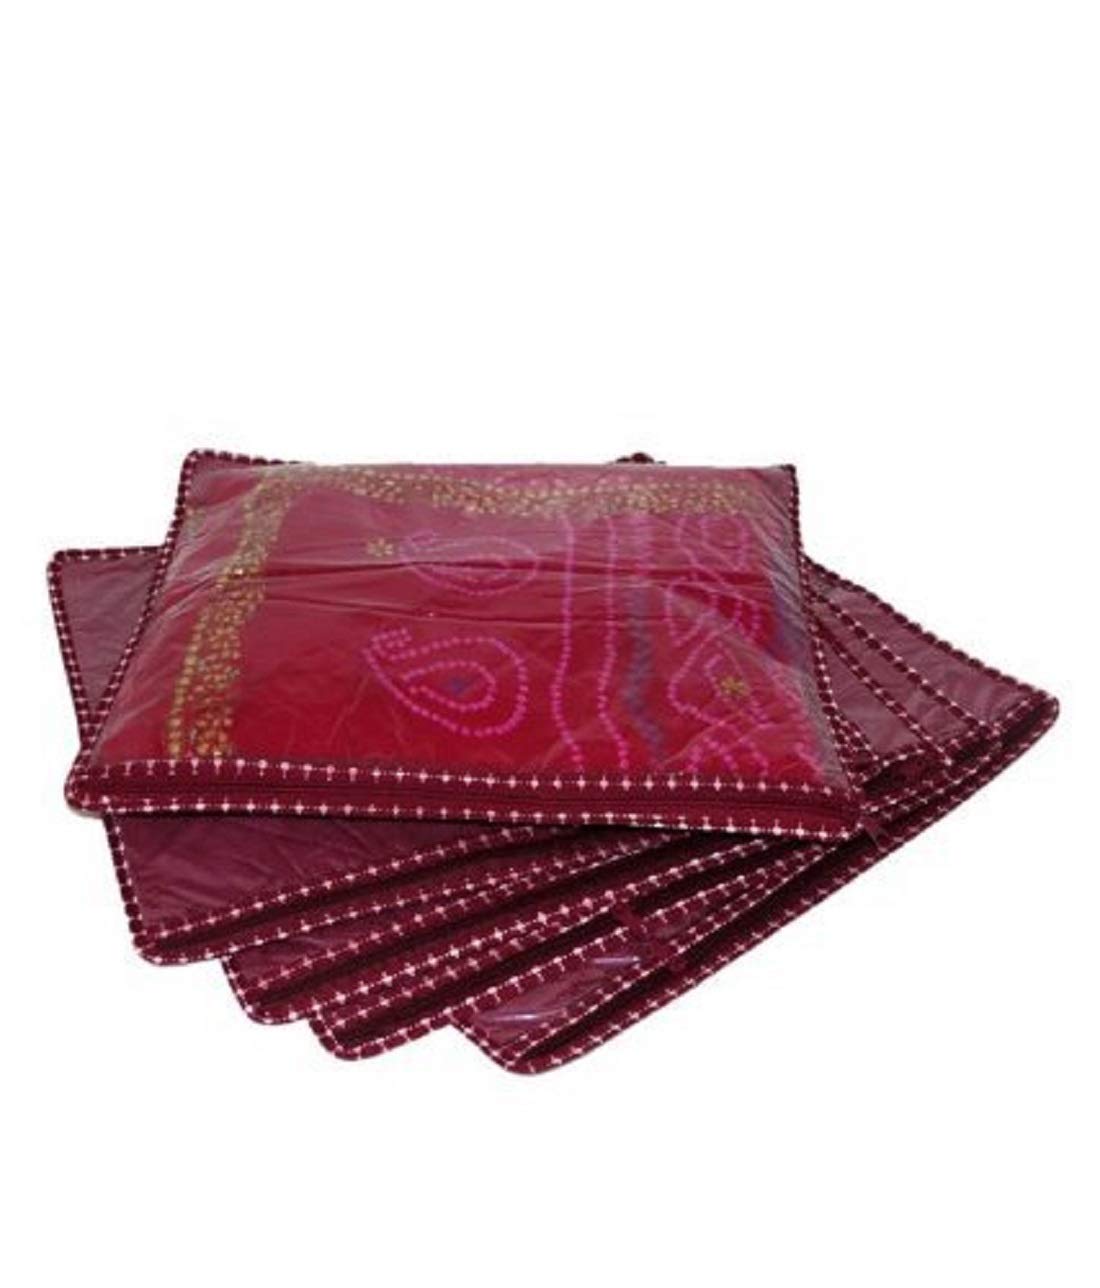 Kuber Industries Resin Saree Covers With Zip|Saree Covers For Storage|Saree Packing Covers For Wedding|Pack of 6 (Maroon)